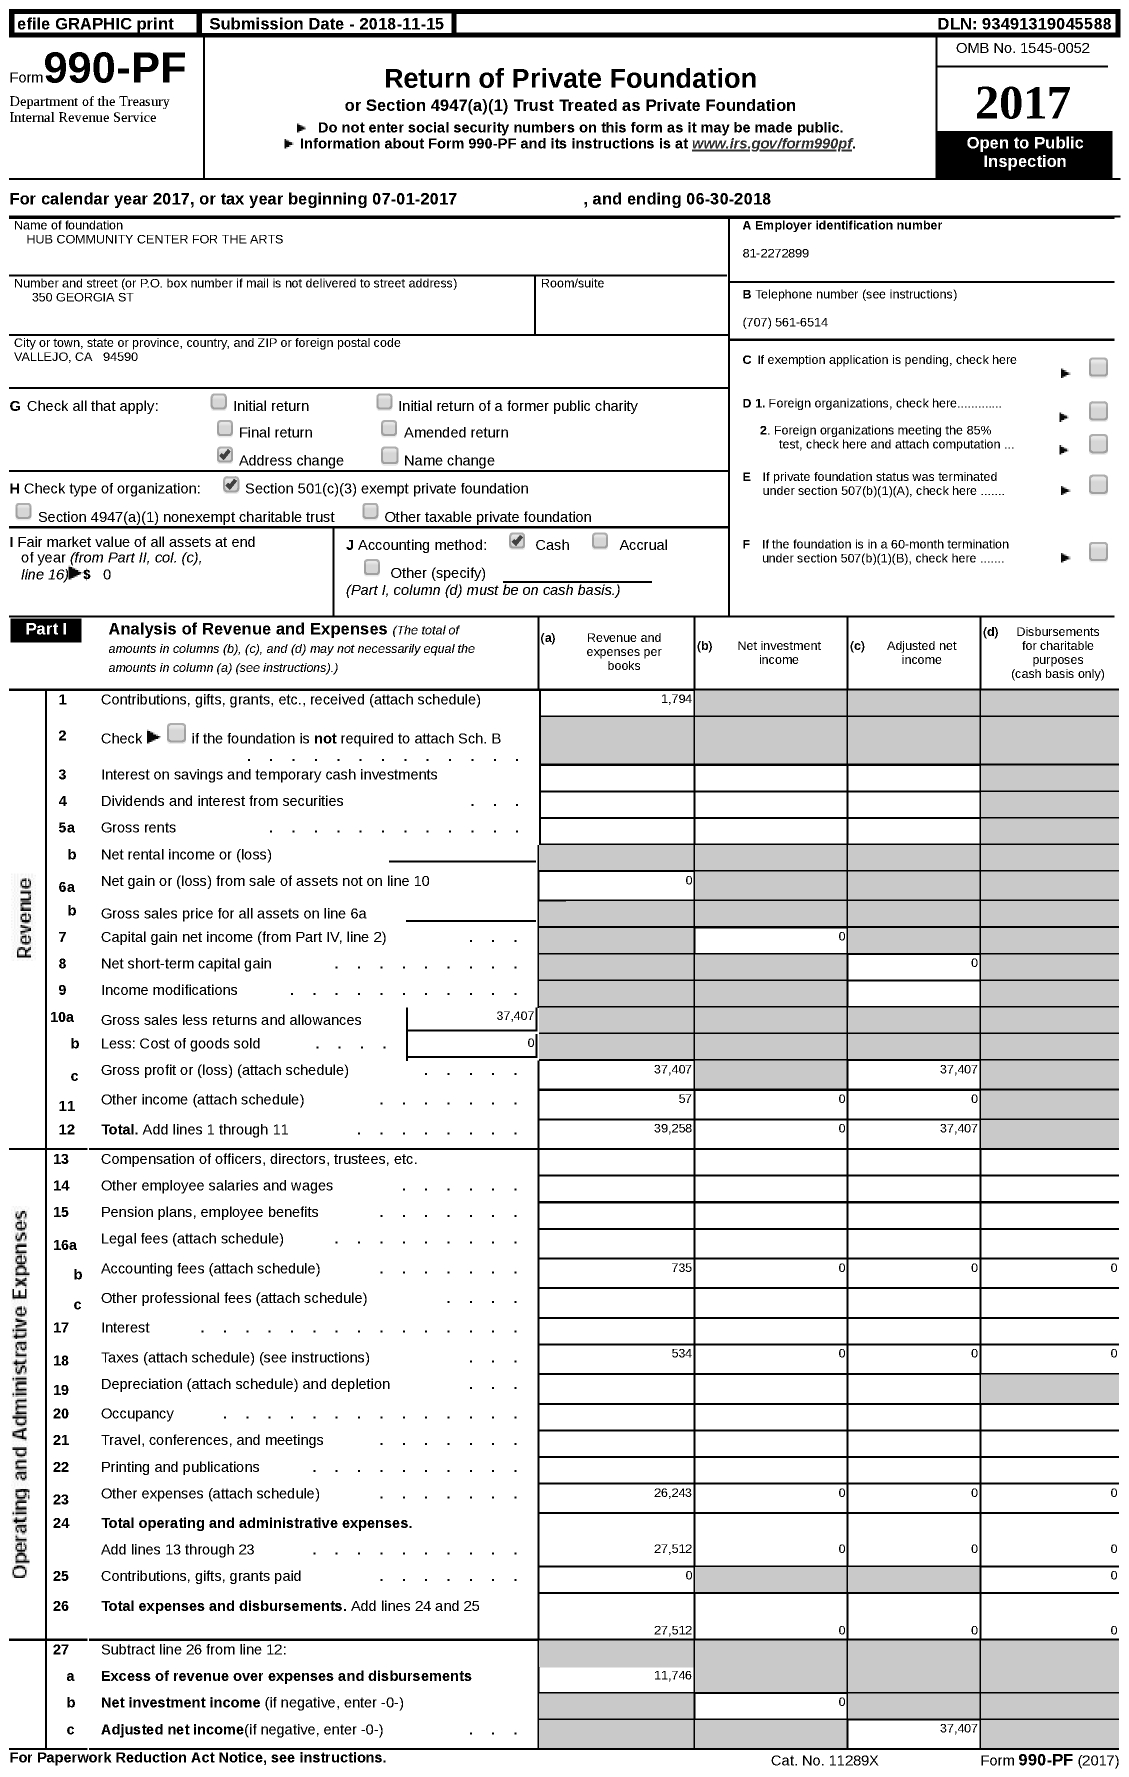 Image of first page of 2017 Form 990PF for Hub Community Center for the Arts